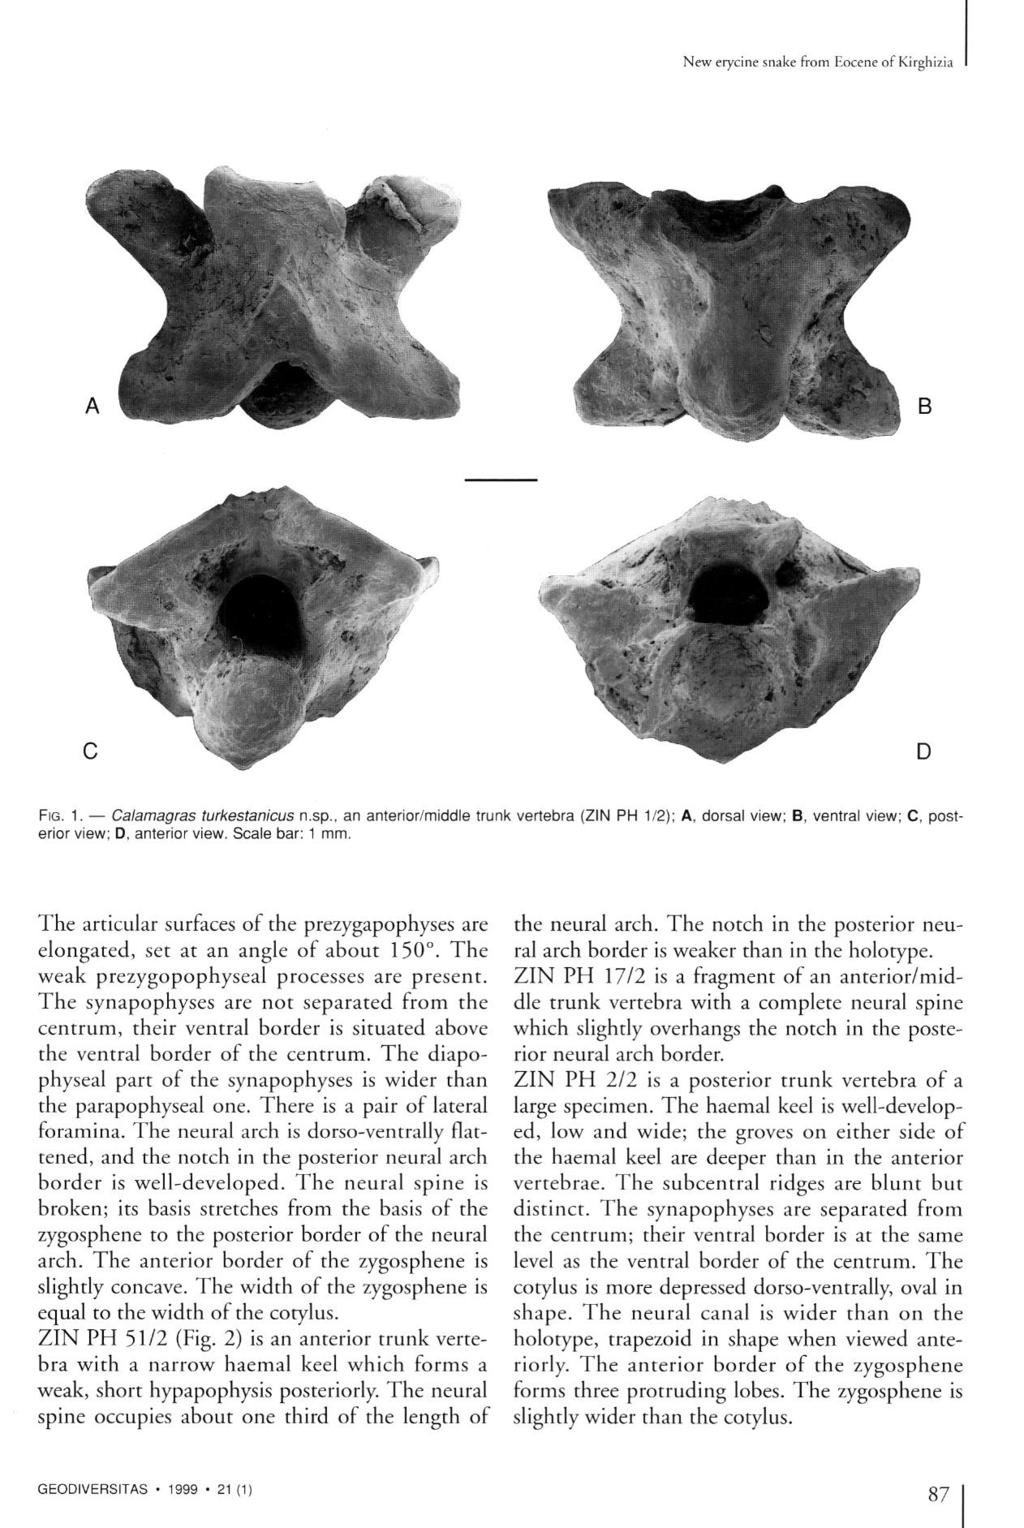 New erycine snake from Eocene of Kirghizia FIG. 1. Calamagras turkestanicus n.sp., an anterior/middle trunk vertebra (ZIN PH 1/2); A, dorsal view; B, ventral view; C, posterior view; D, anterior view.